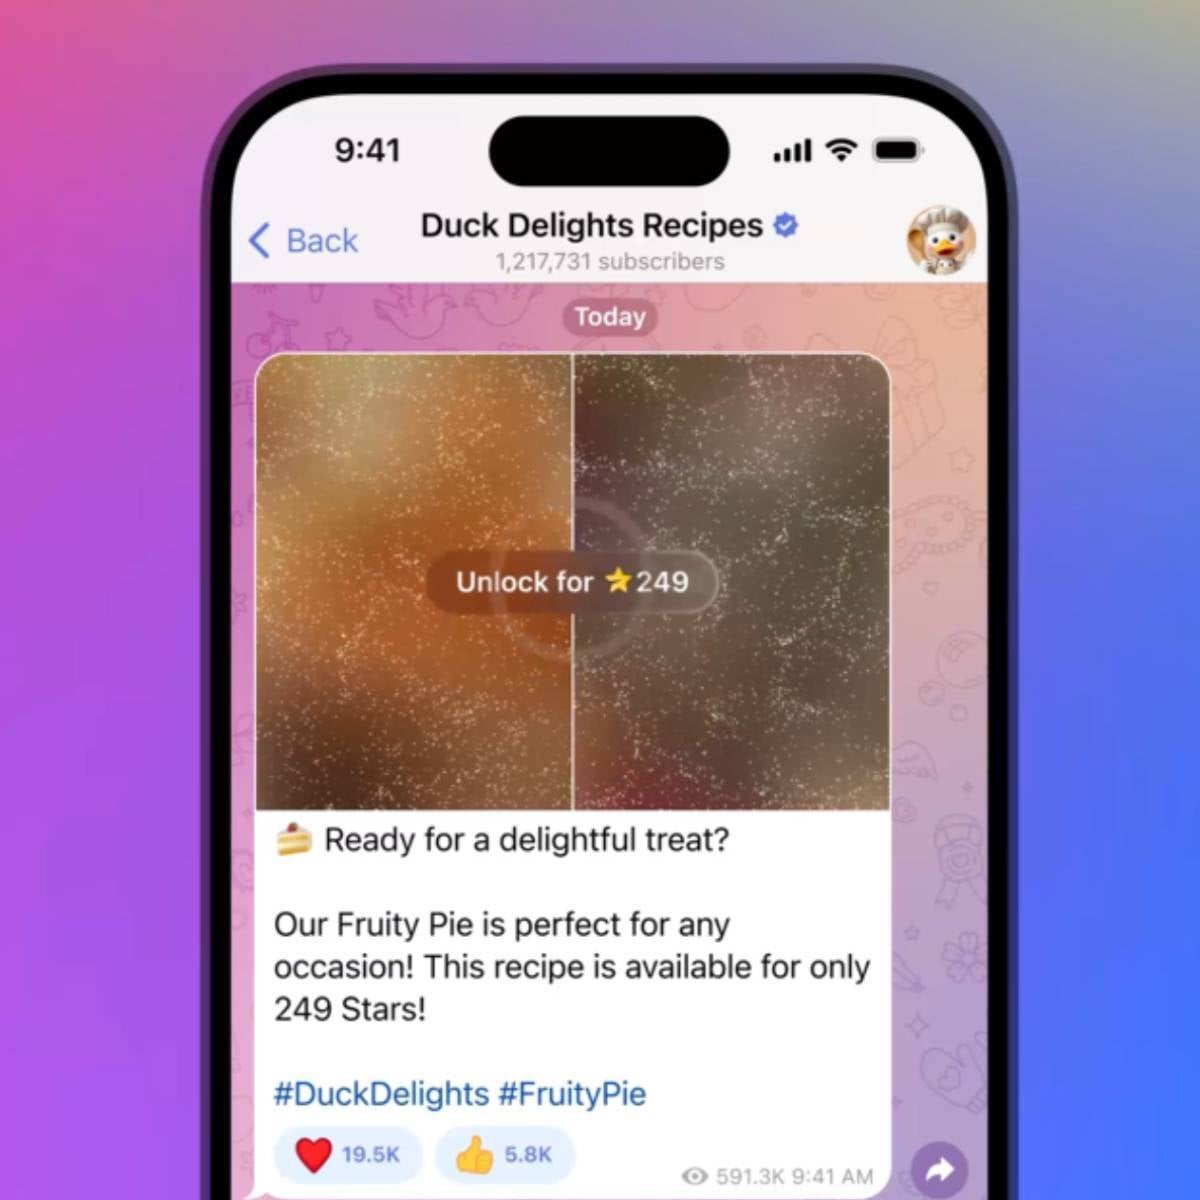 Image credit - Telegram - Telegram enters July with "Search Stories by Location" and seven other new features